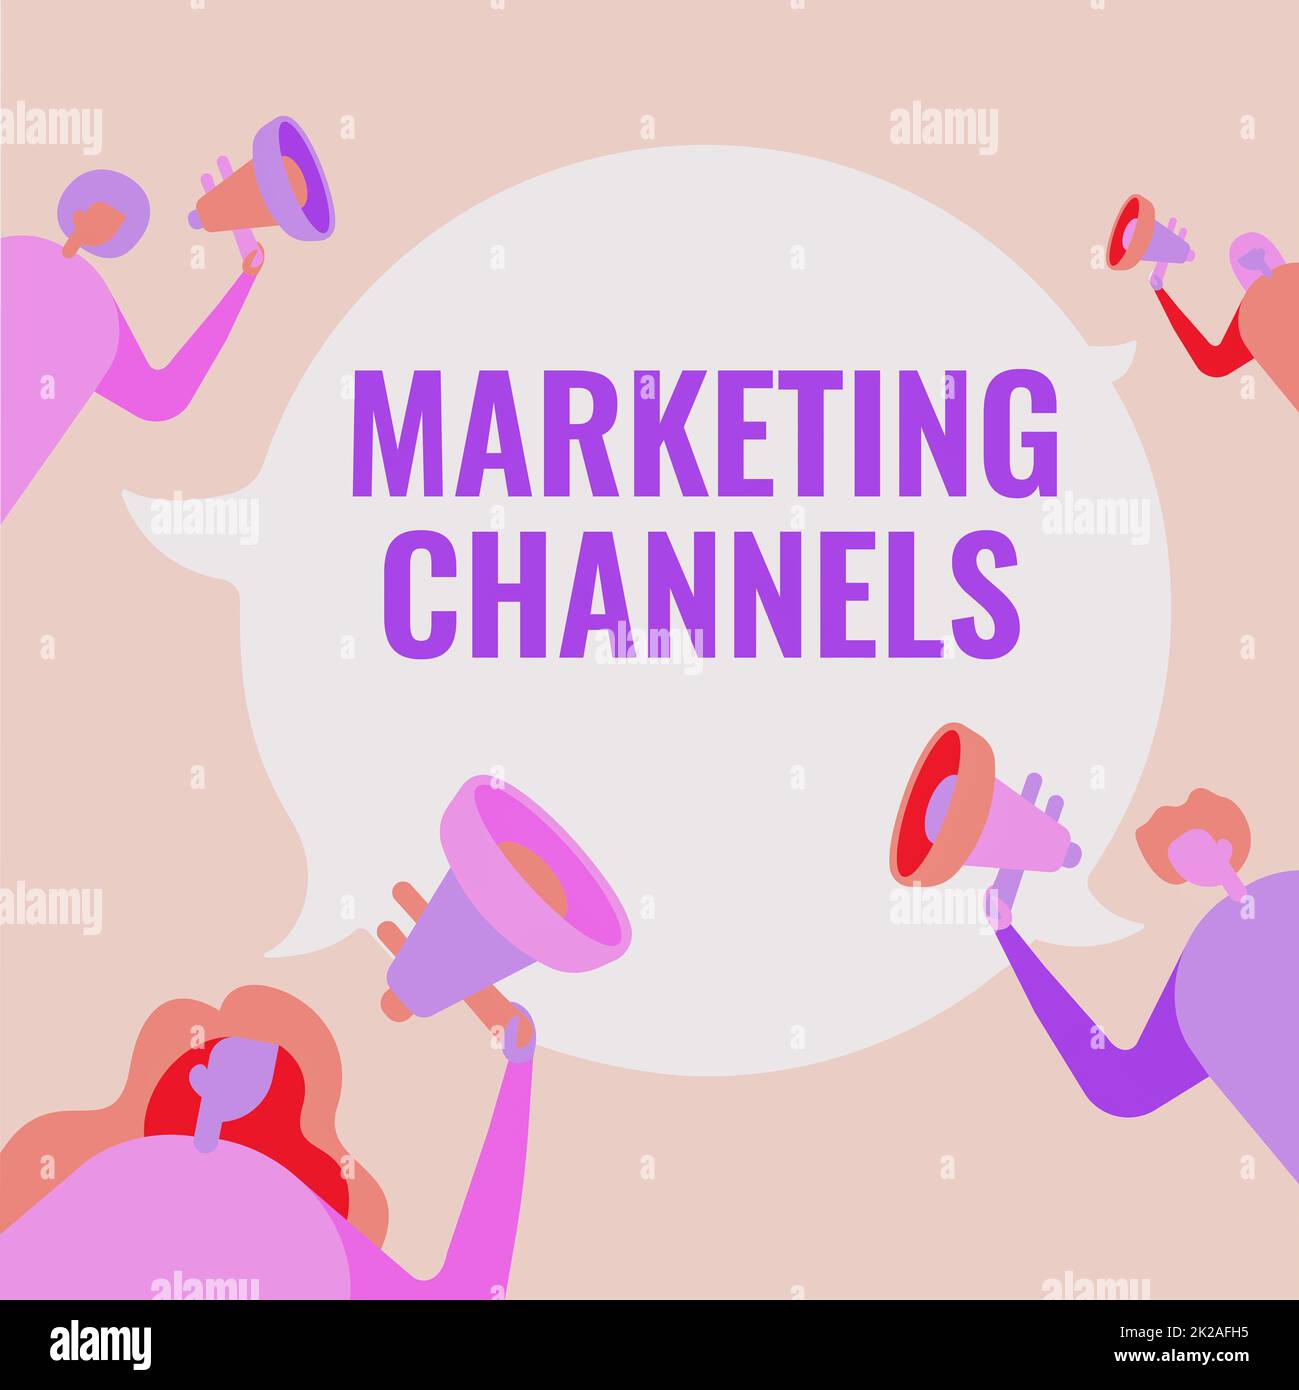 Text showing inspiration Marketing Channels. Internet Concept the necessary to transfer the ownership of goods People Drawing Holding Their Megaphones Talking With Each Other. Stock Photo